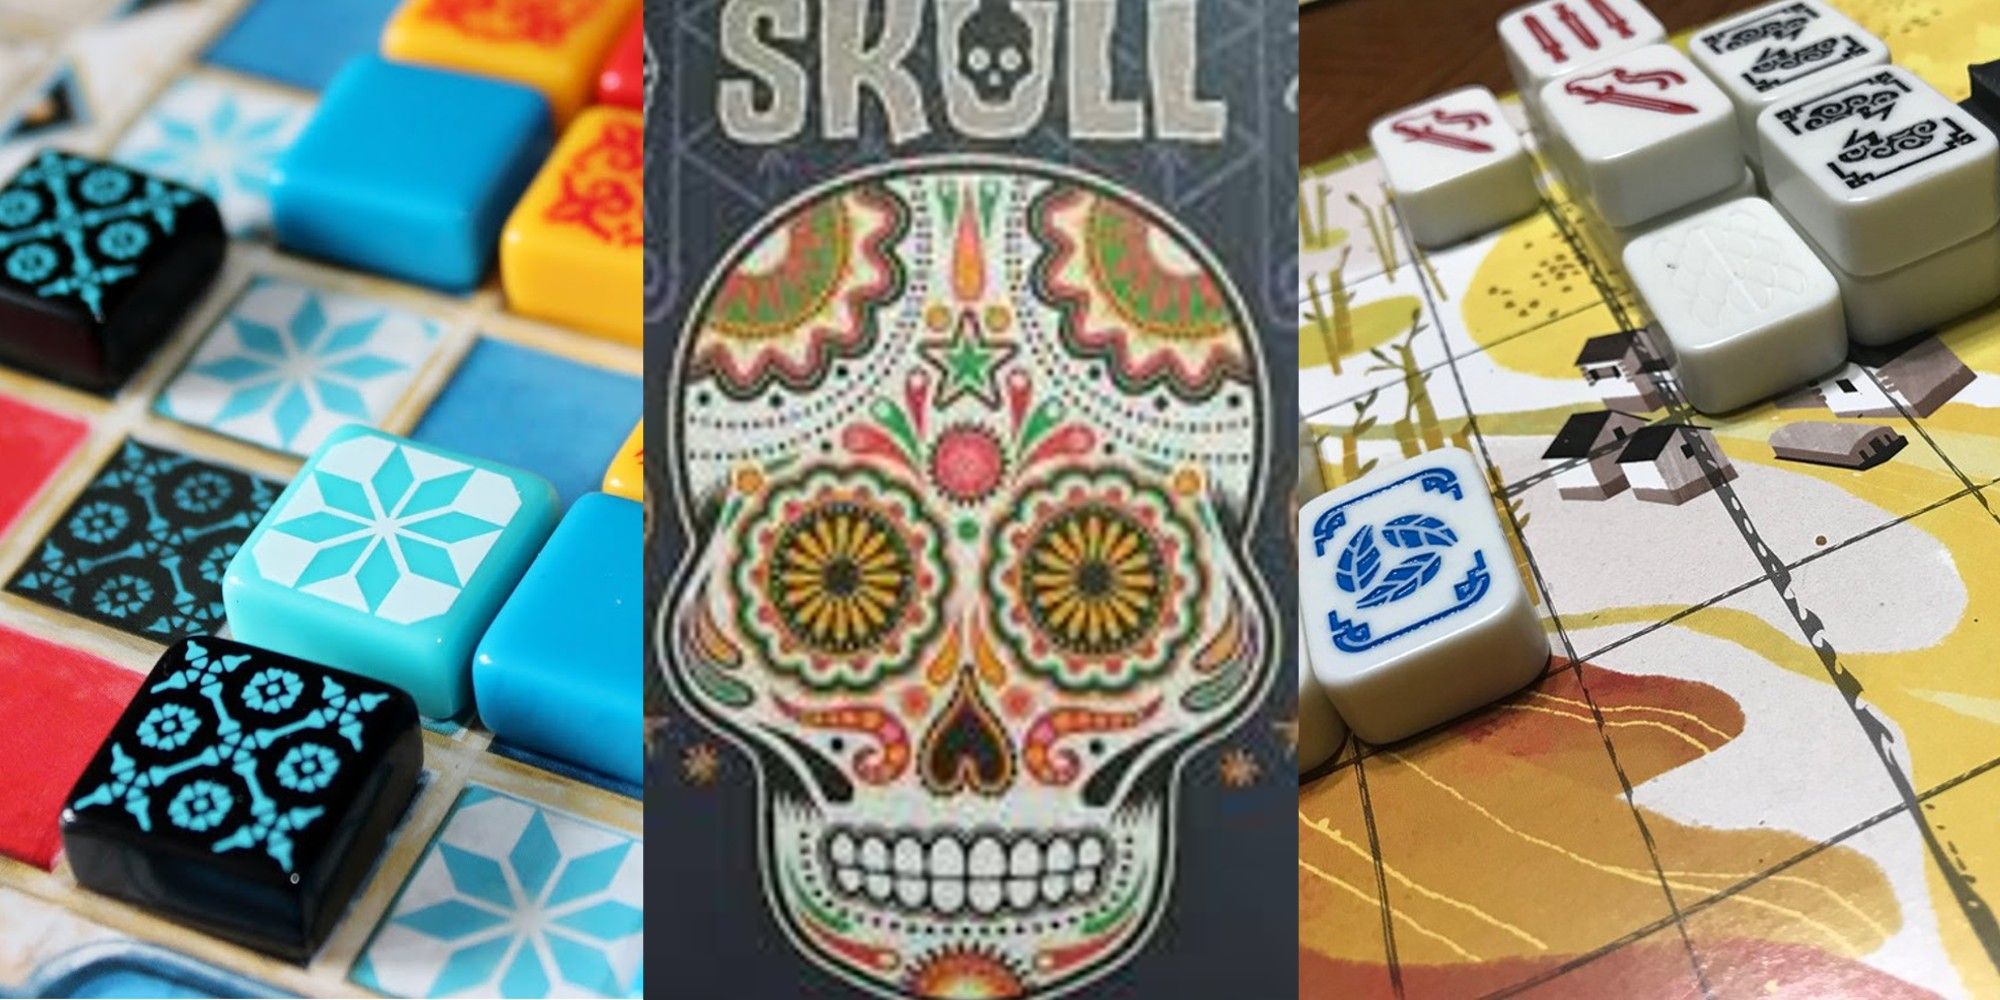 Collage Of Games: Azul, Skull, and Dragon Castle